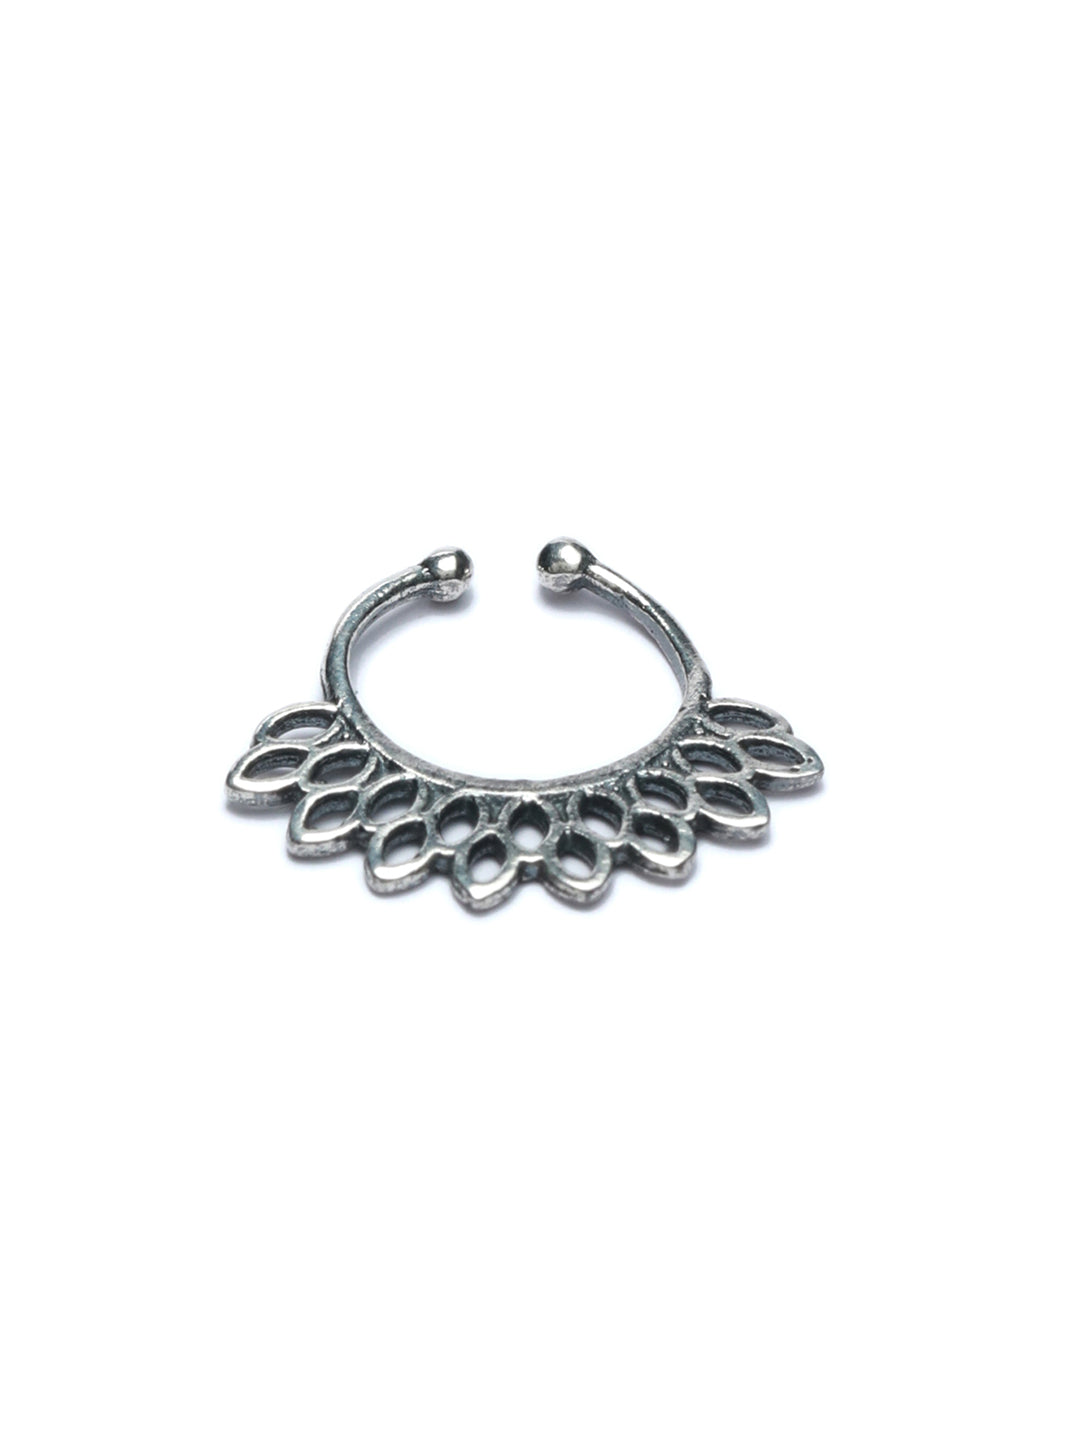 925 Sterling Silver Handmade Nose Hoop Ring Septum Piercing Jewelry for  Women, 7mm 22 Gauge : Handmade Products - Amazon.com